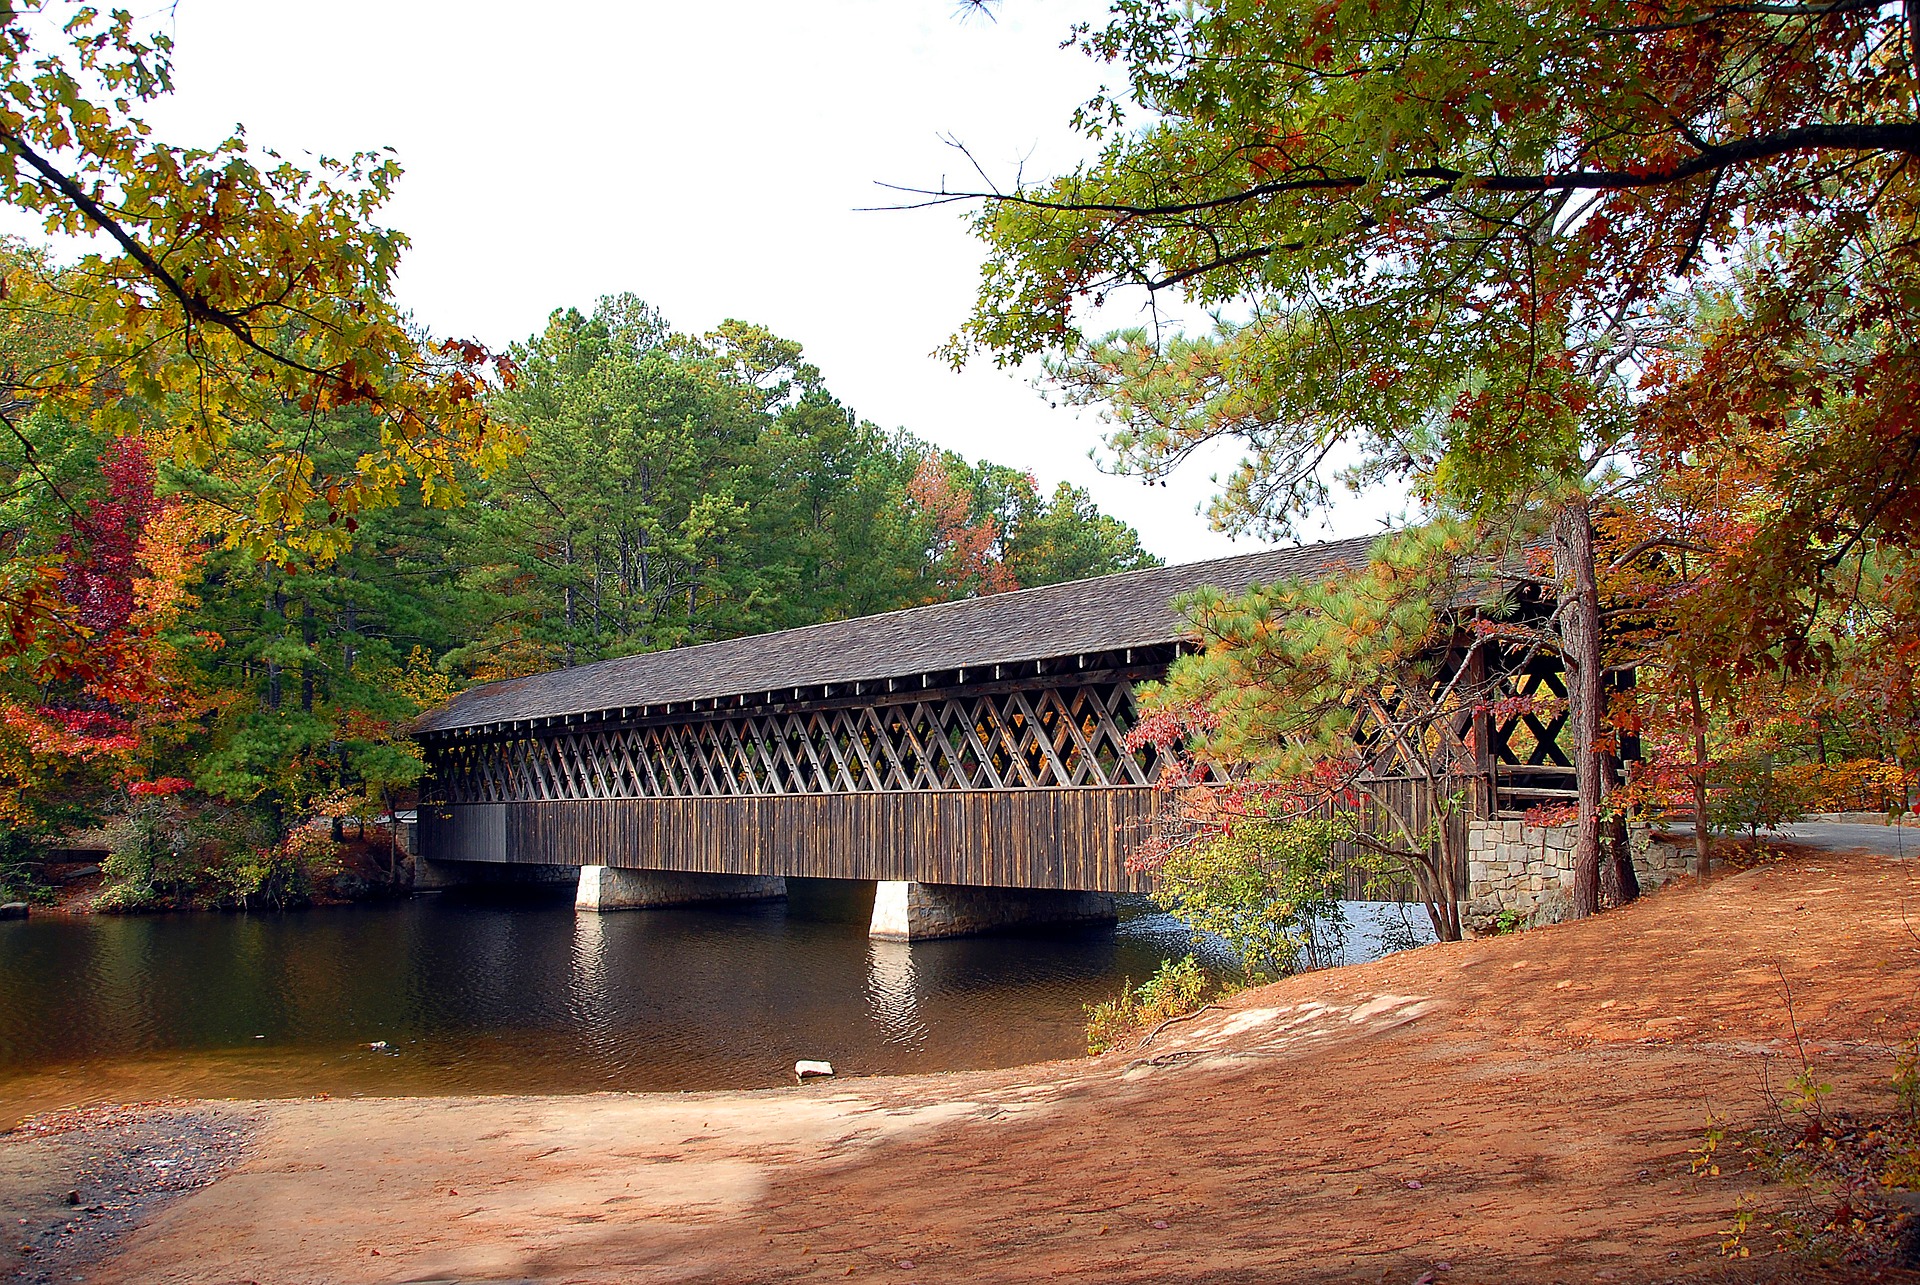 A covered bridge over a body of water with a Two Bedroom Apartment.